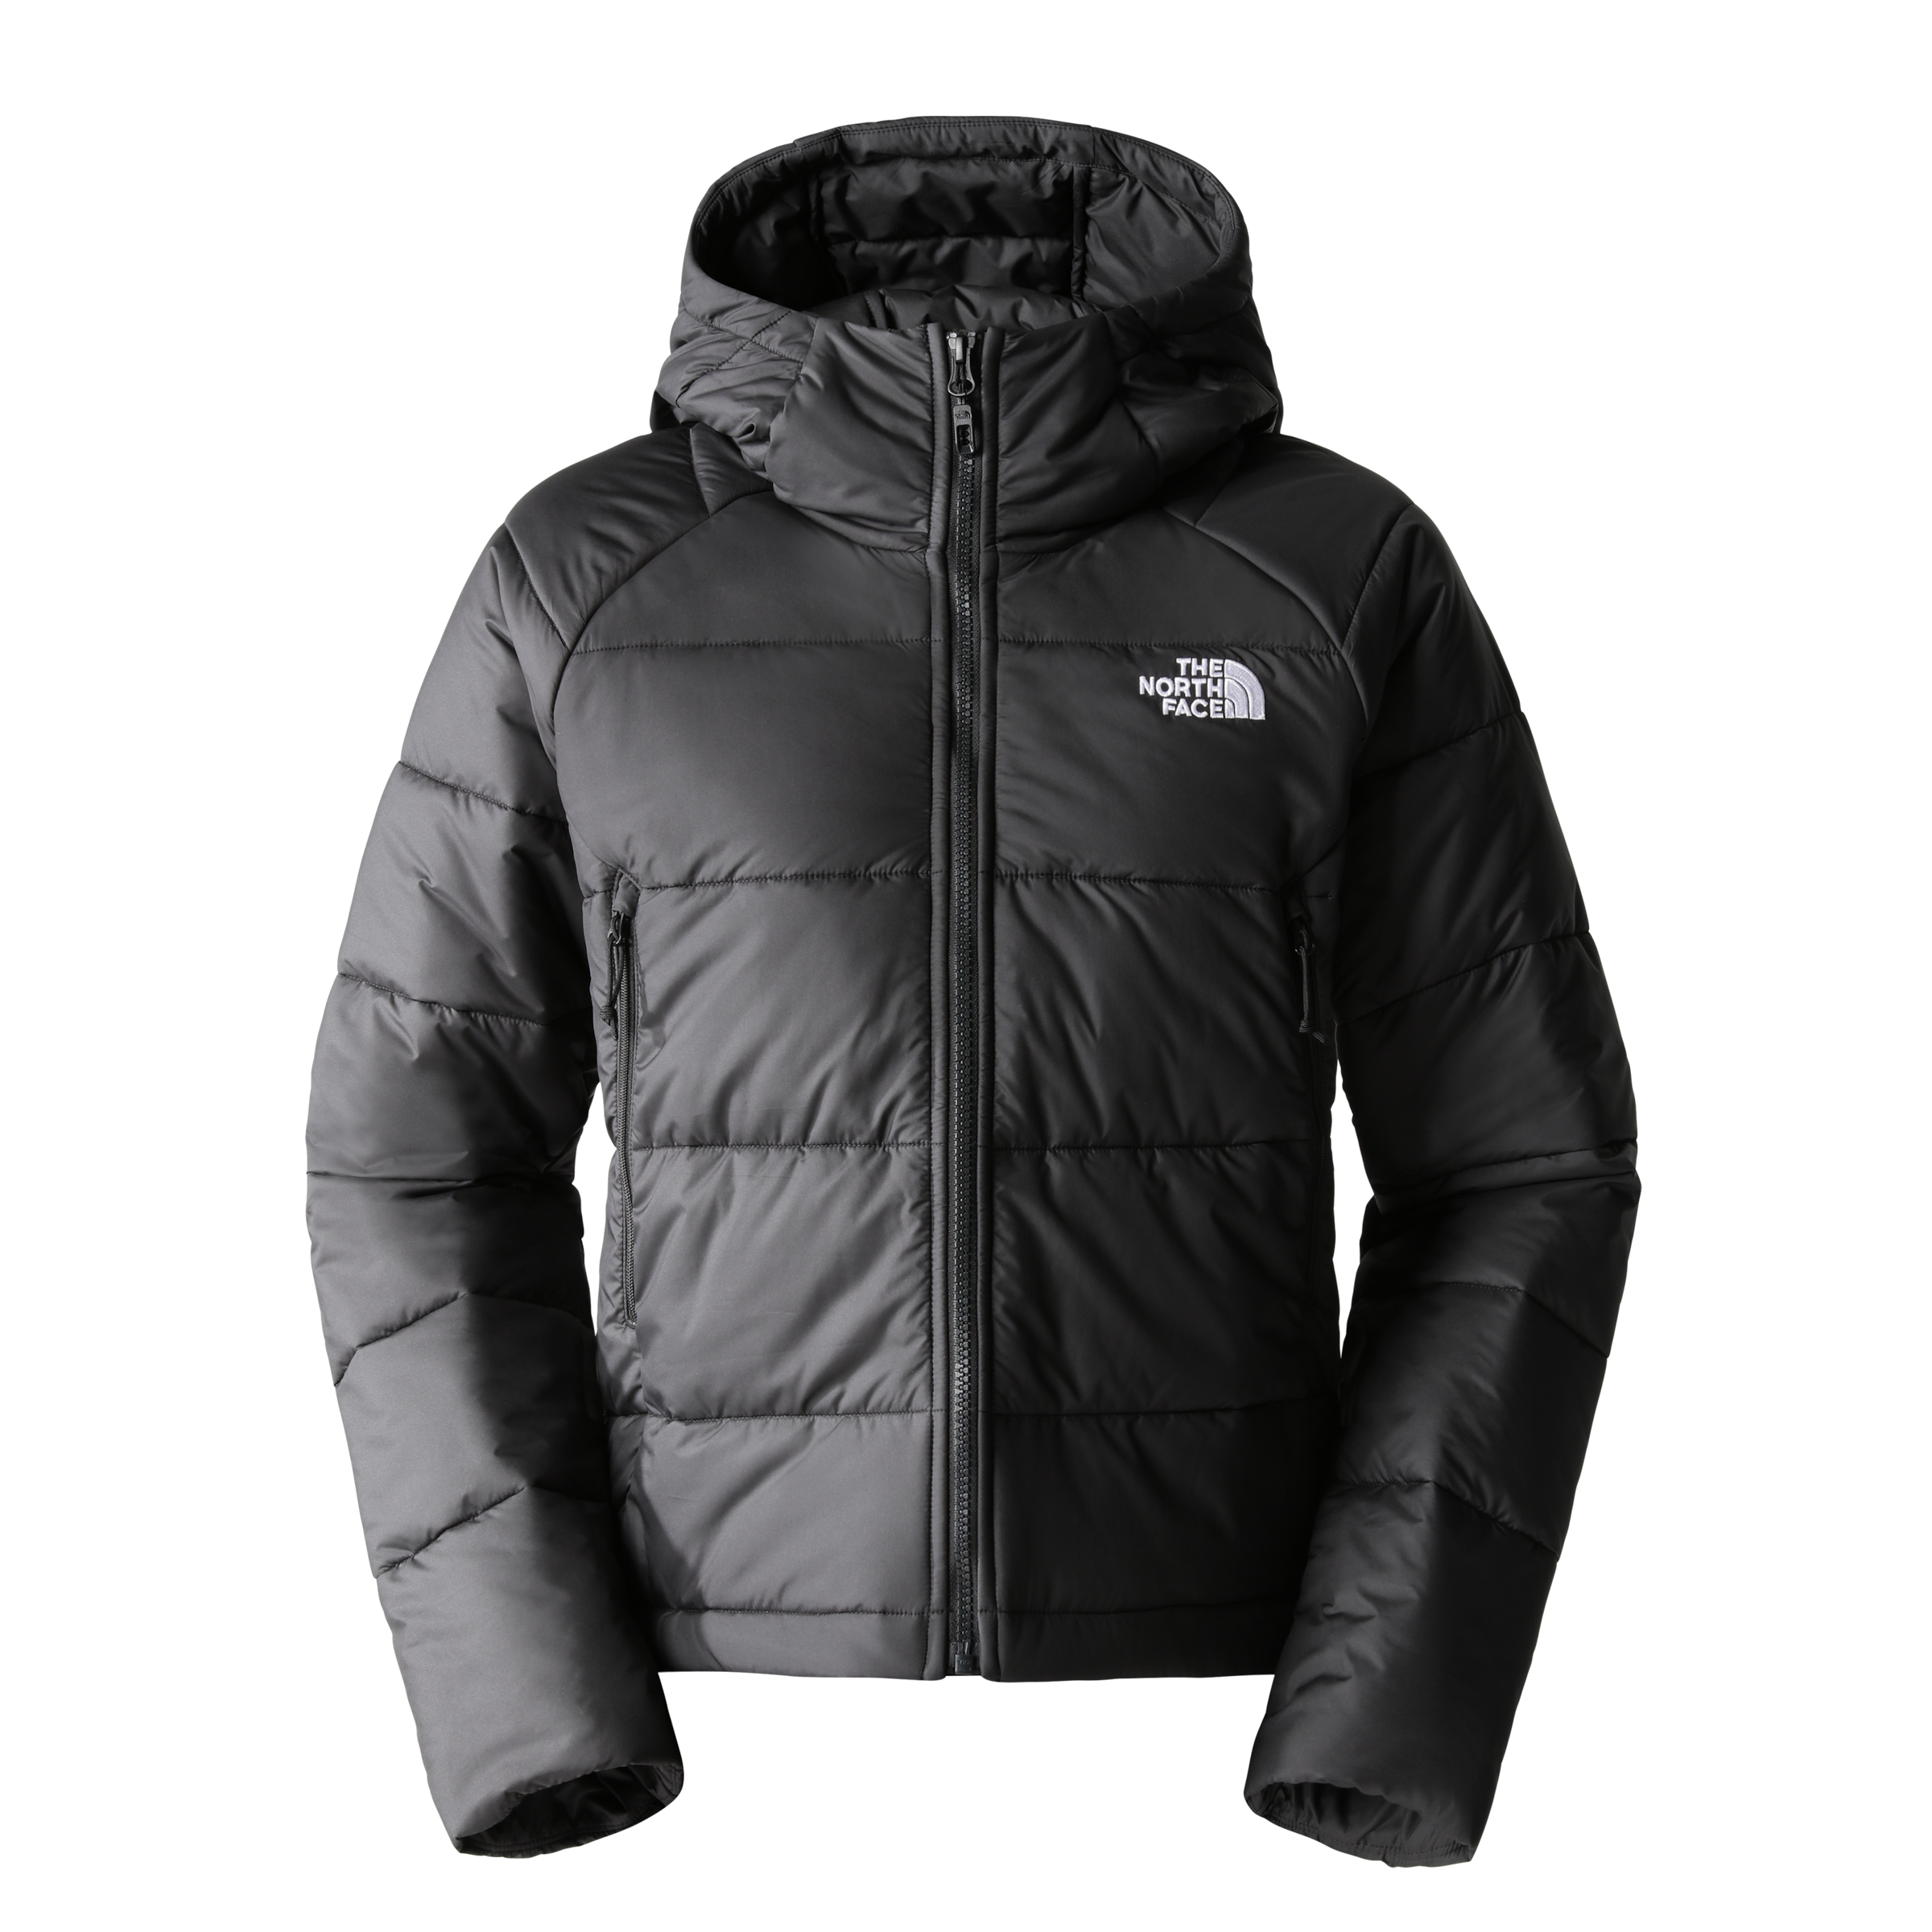 The North Face Funktionsjacke SYNTHETIC bei »W mit Logodruck mit HYALITE ♕ Kapuze, HOODIE«